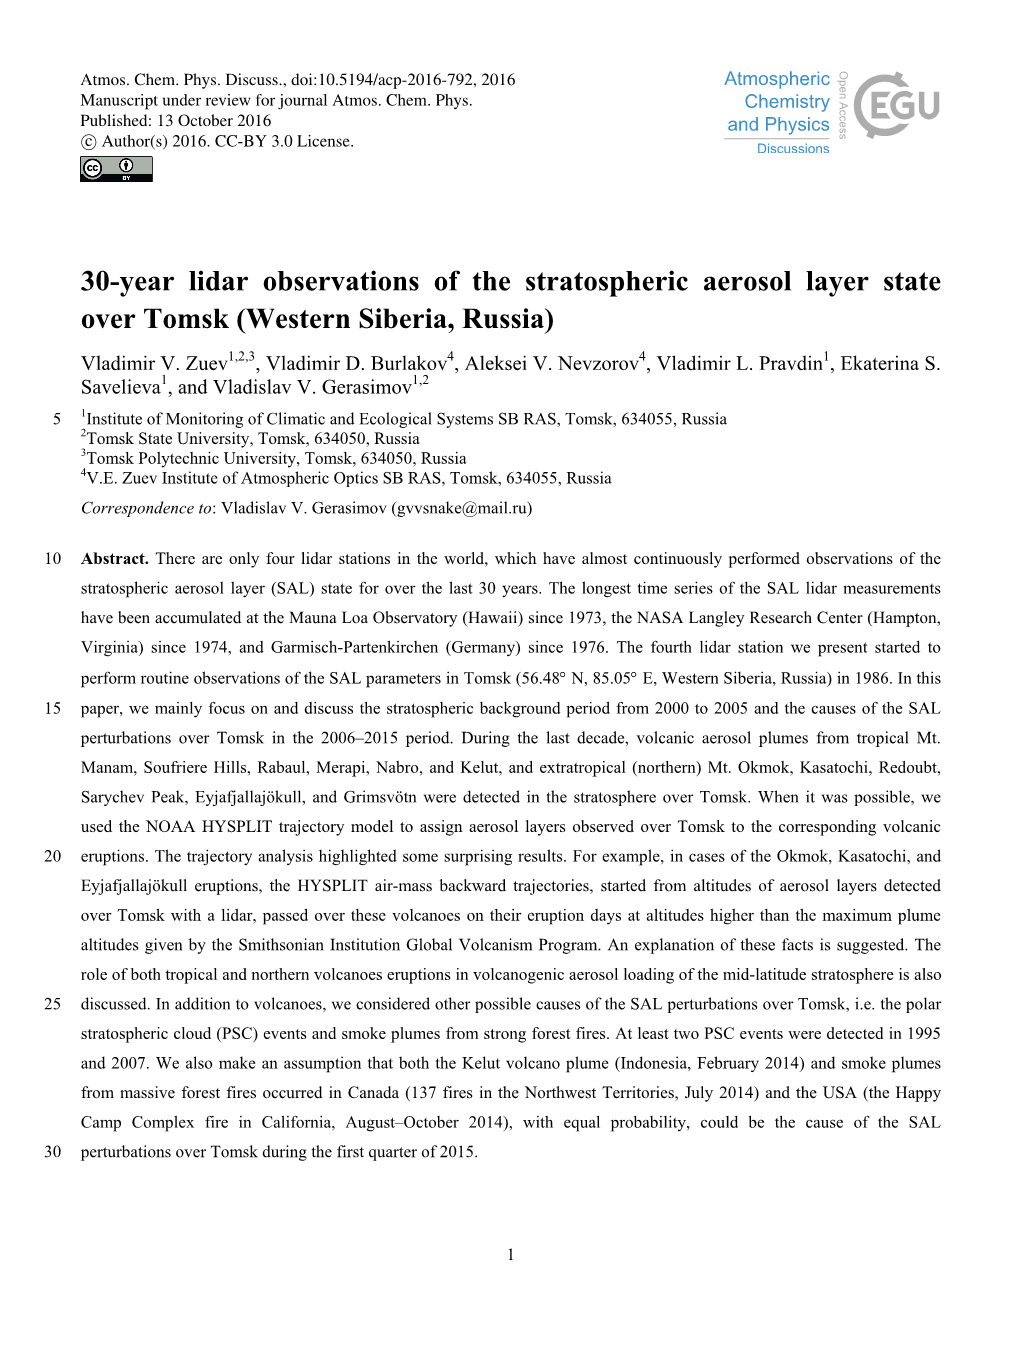 30-Year Lidar Observations of the Stratospheric Aerosol Layer State Over Tomsk (Western Siberia, Russia) Vladimir V